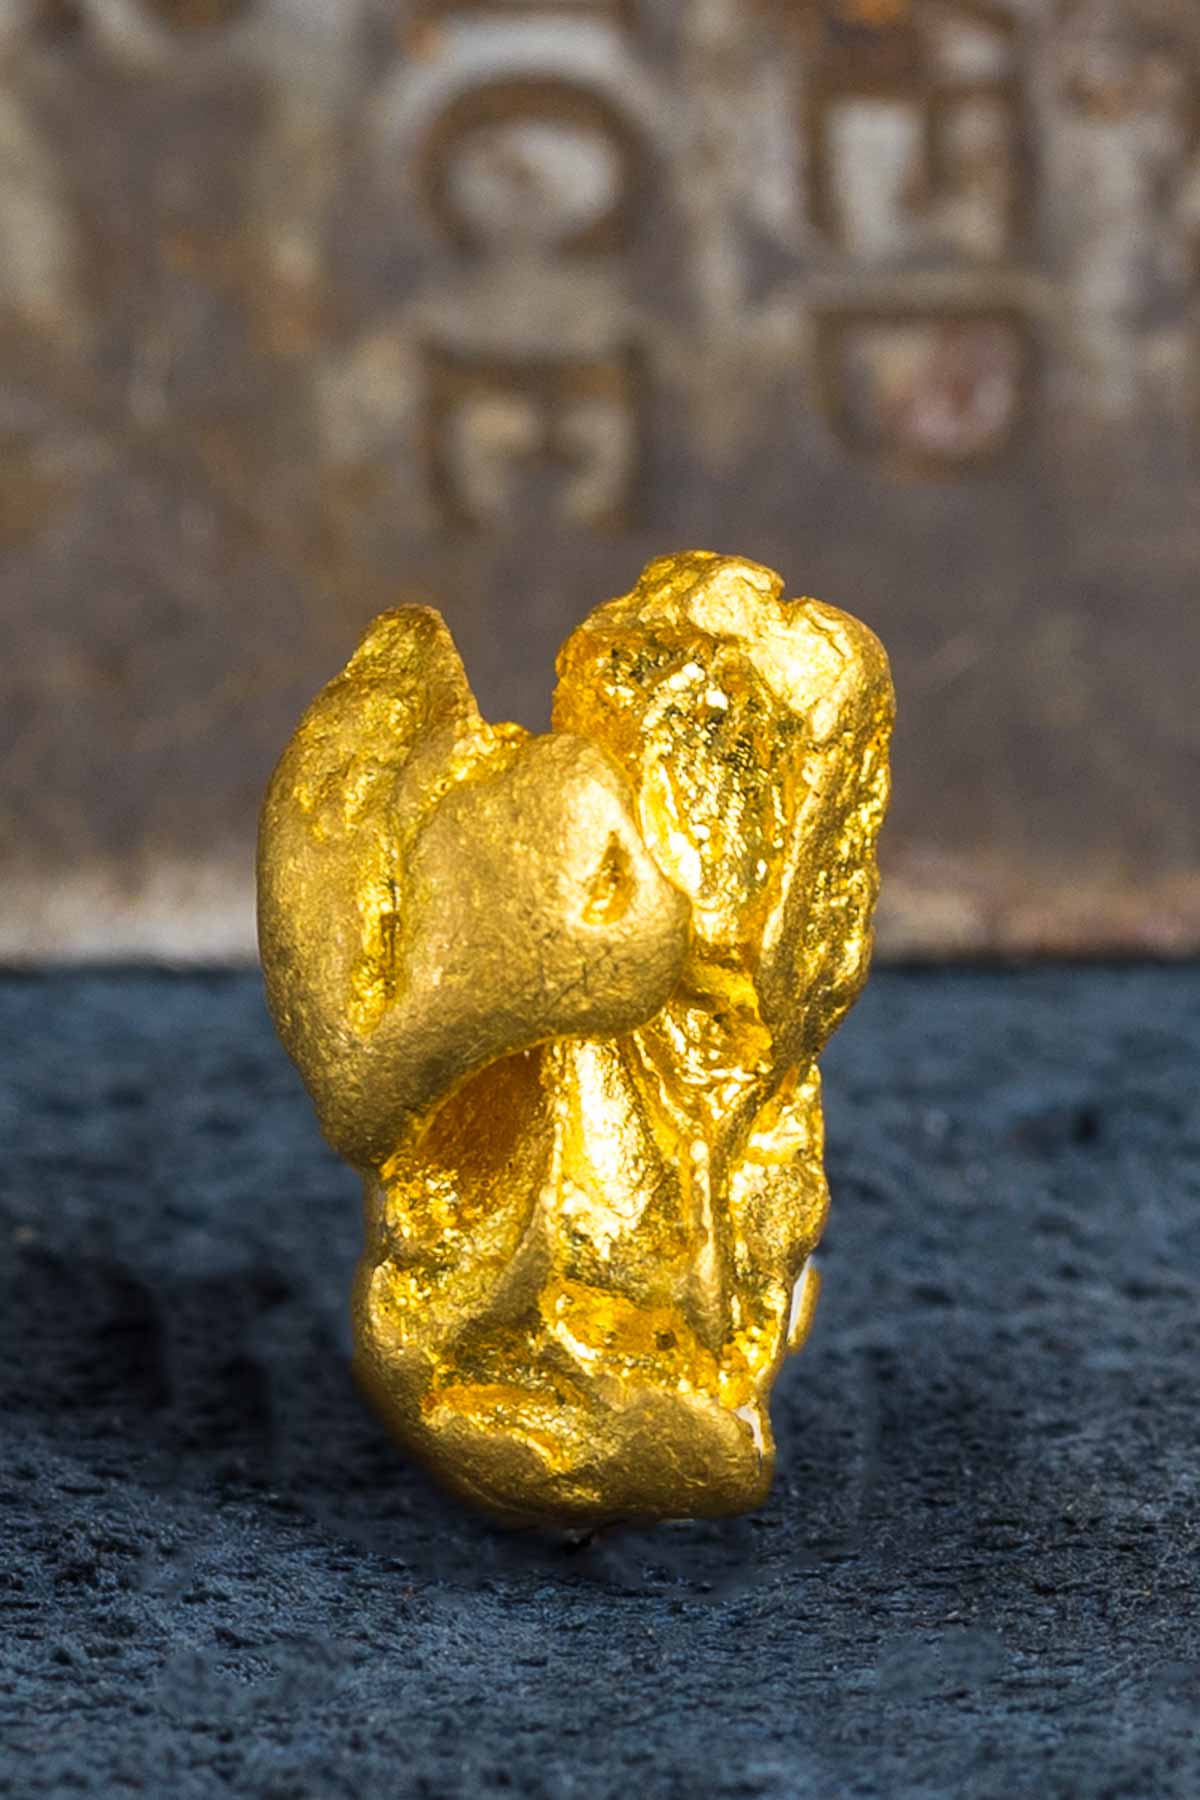 Chunky and Elongated Natural Australian Gold Nugget 5.37 grams